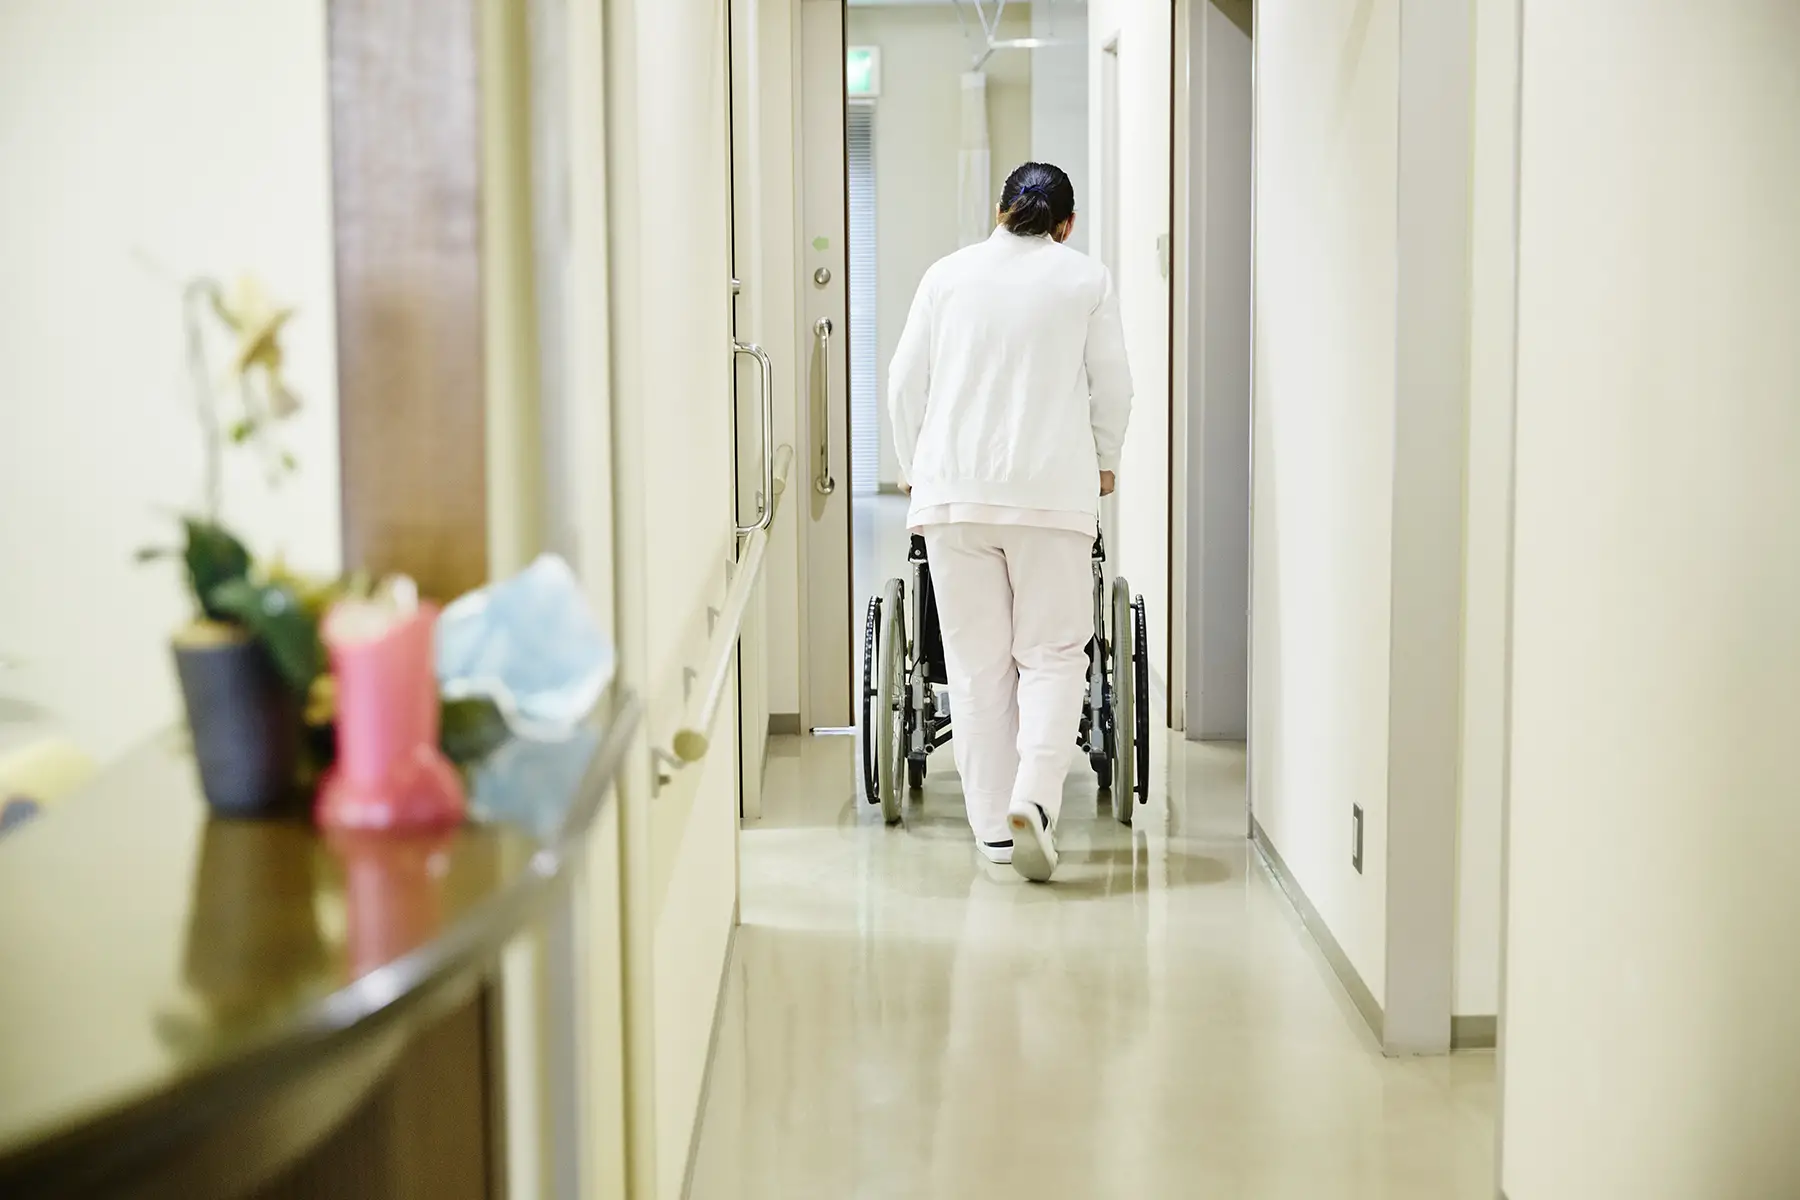 Nurse pushing a patient's wheelchair down the hall away from camera